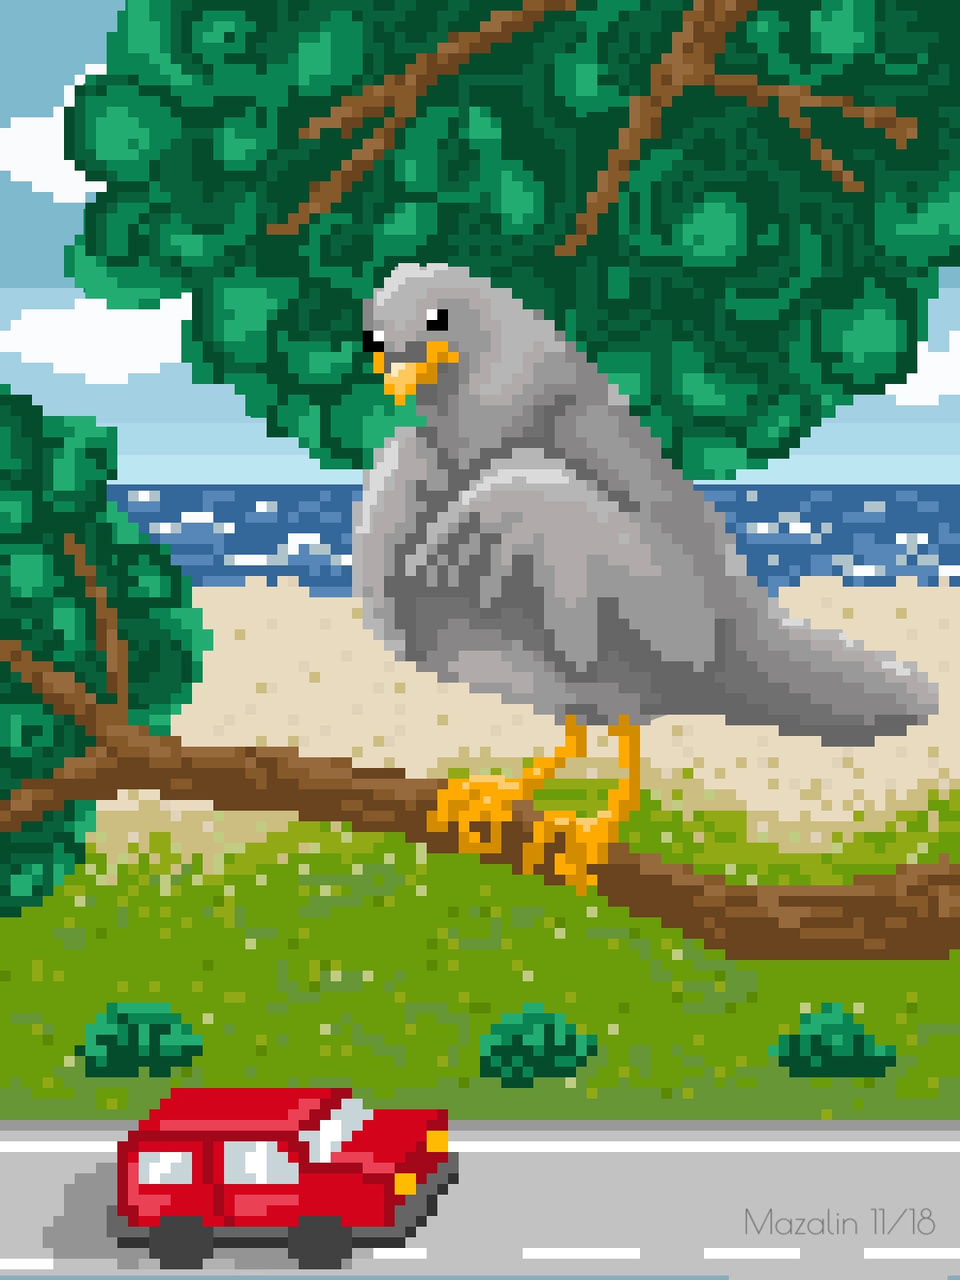 I'm calling this The Plotting Pigeon. I never tried pixel art before, I guessed it was going to be difficult but it was worth it. #pixelchallenge #fridayswithsketch #pigeon